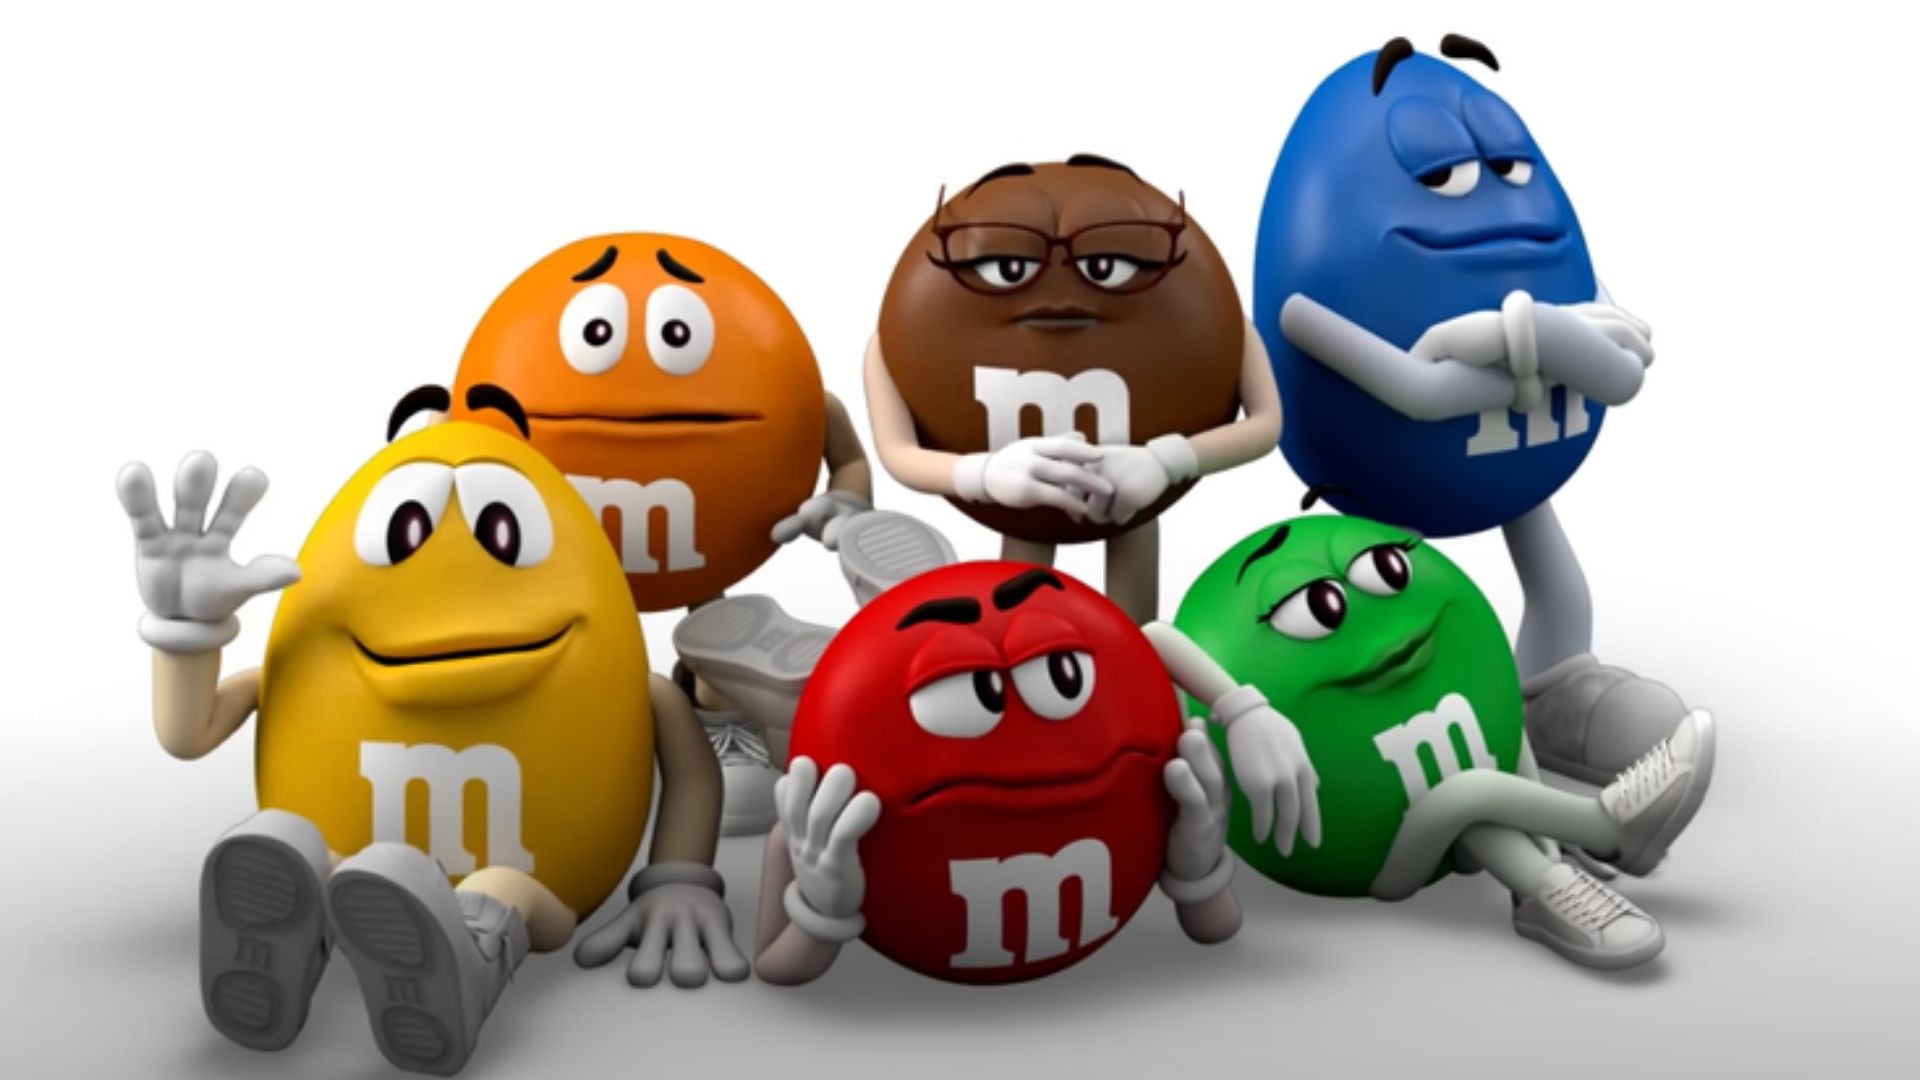 M&M's New Colors, Shoes, and Personalities for Characters